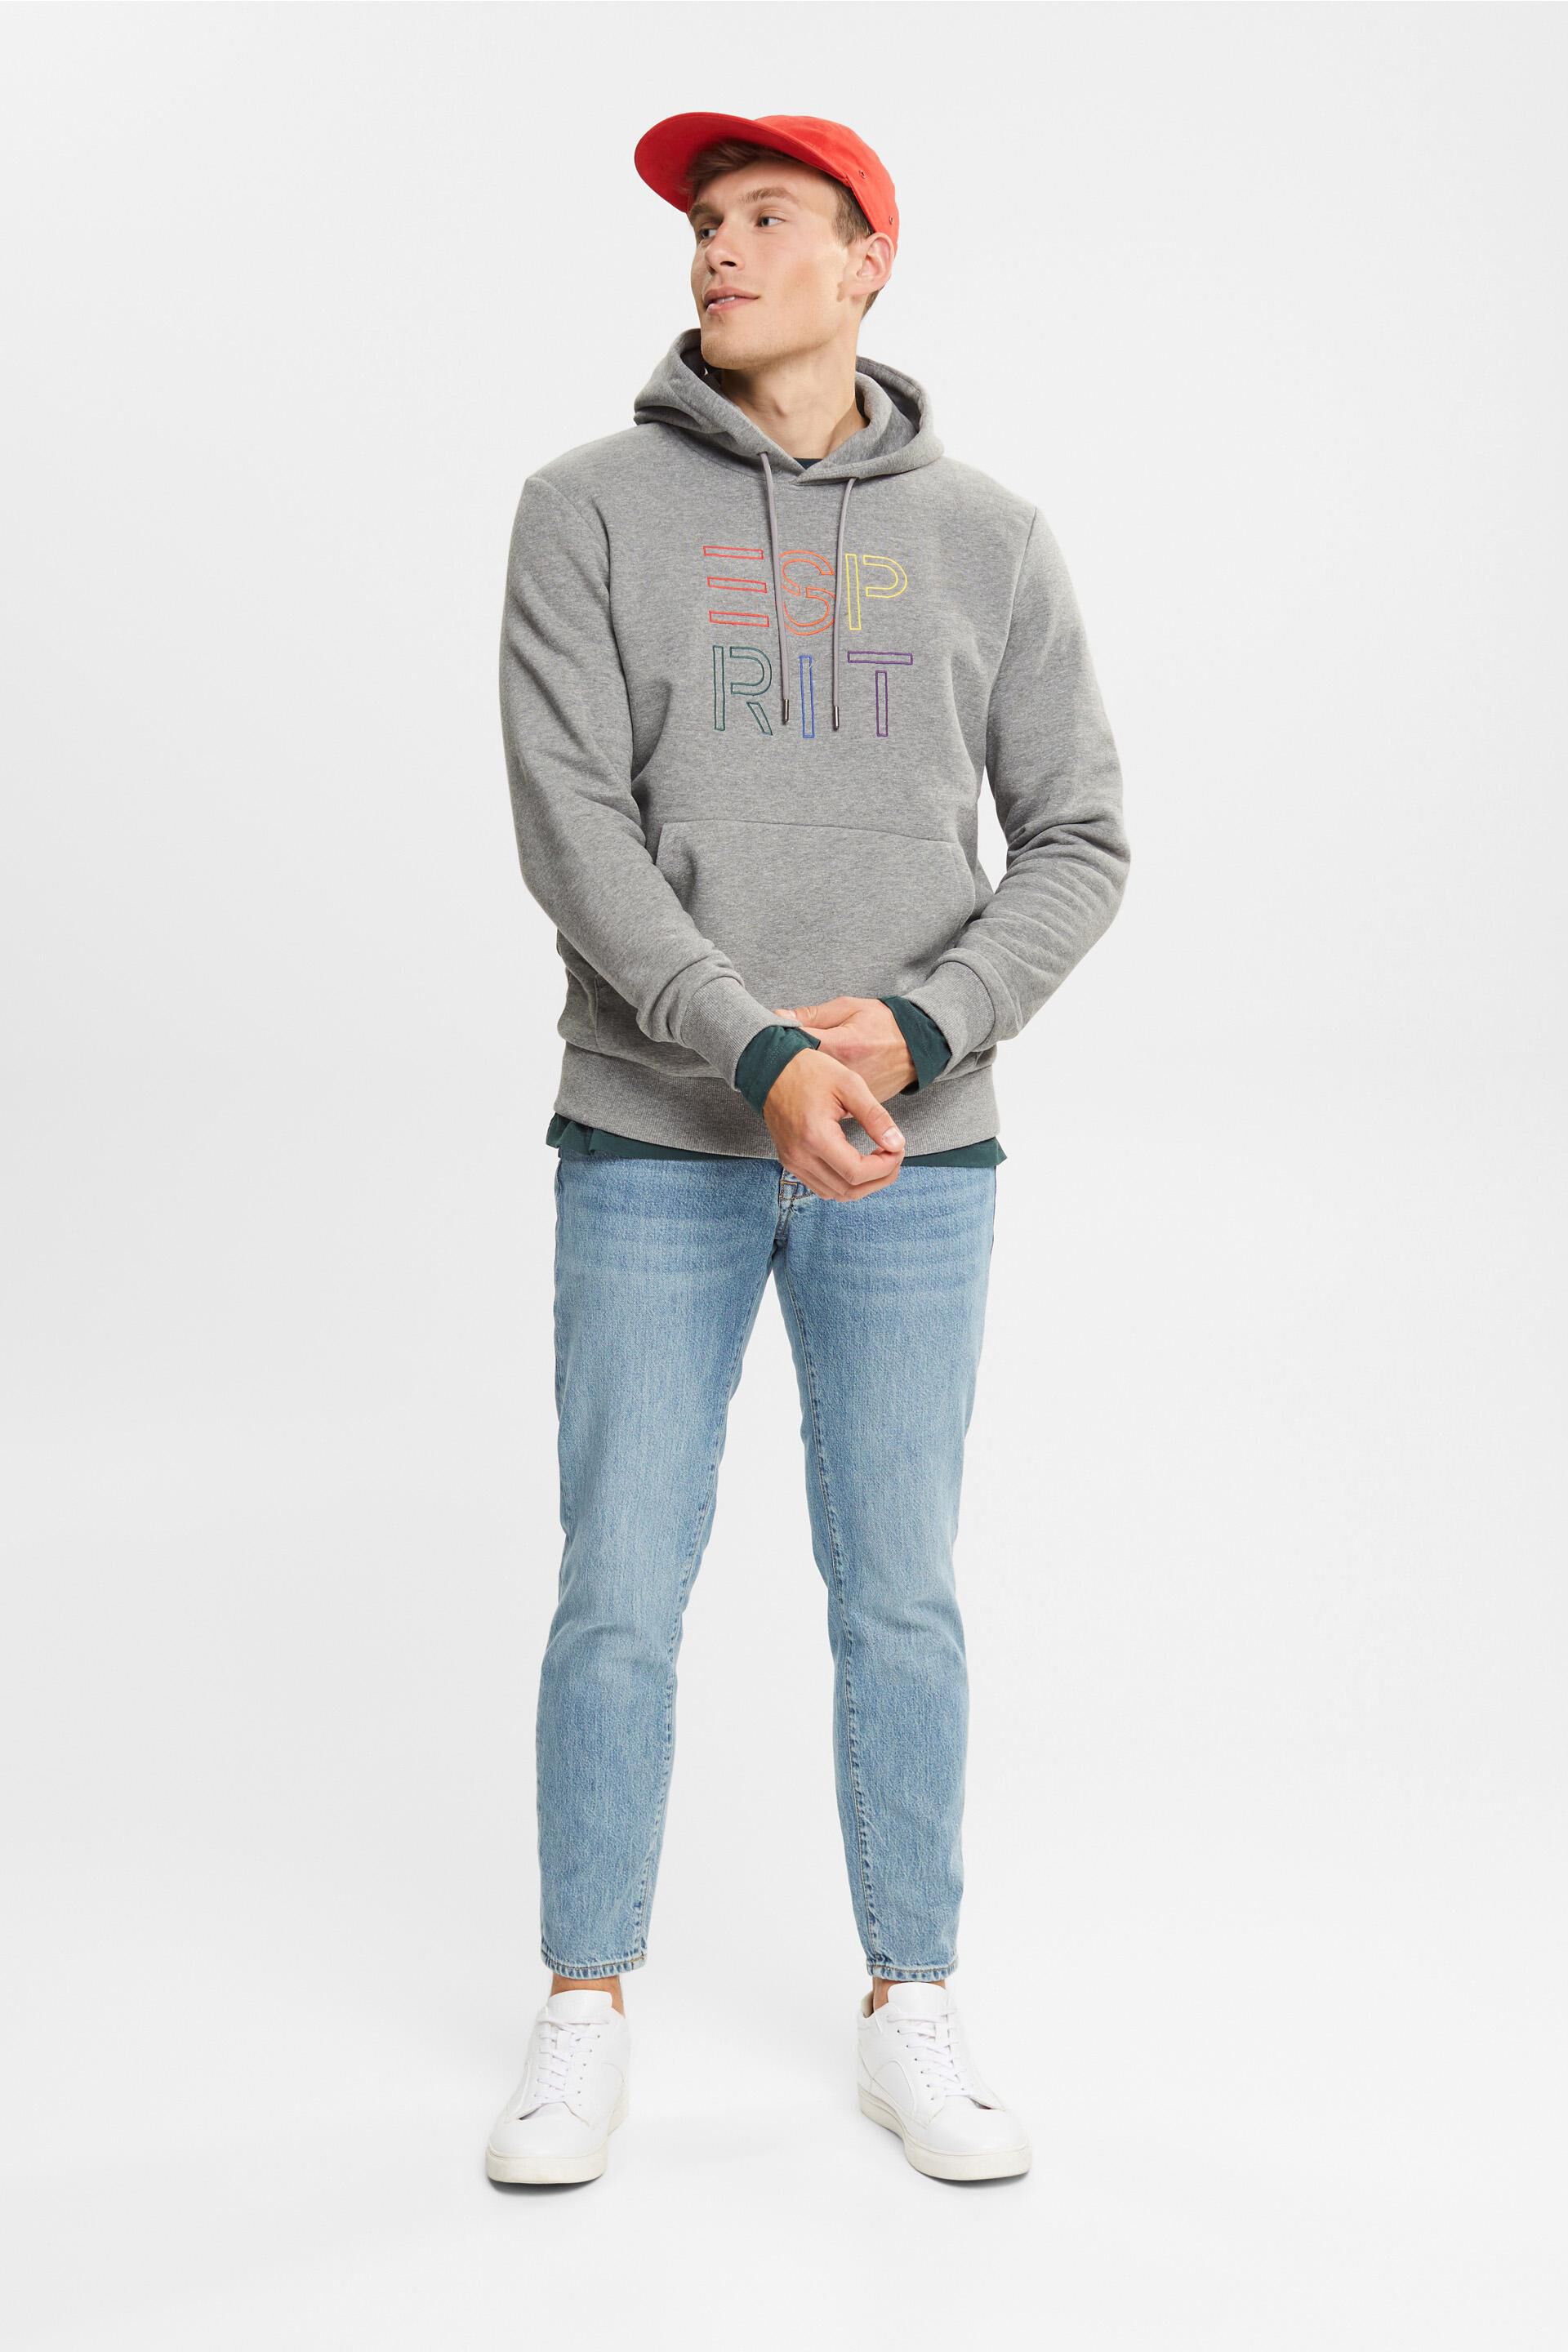 Esprit logo embroidered with Hoodie